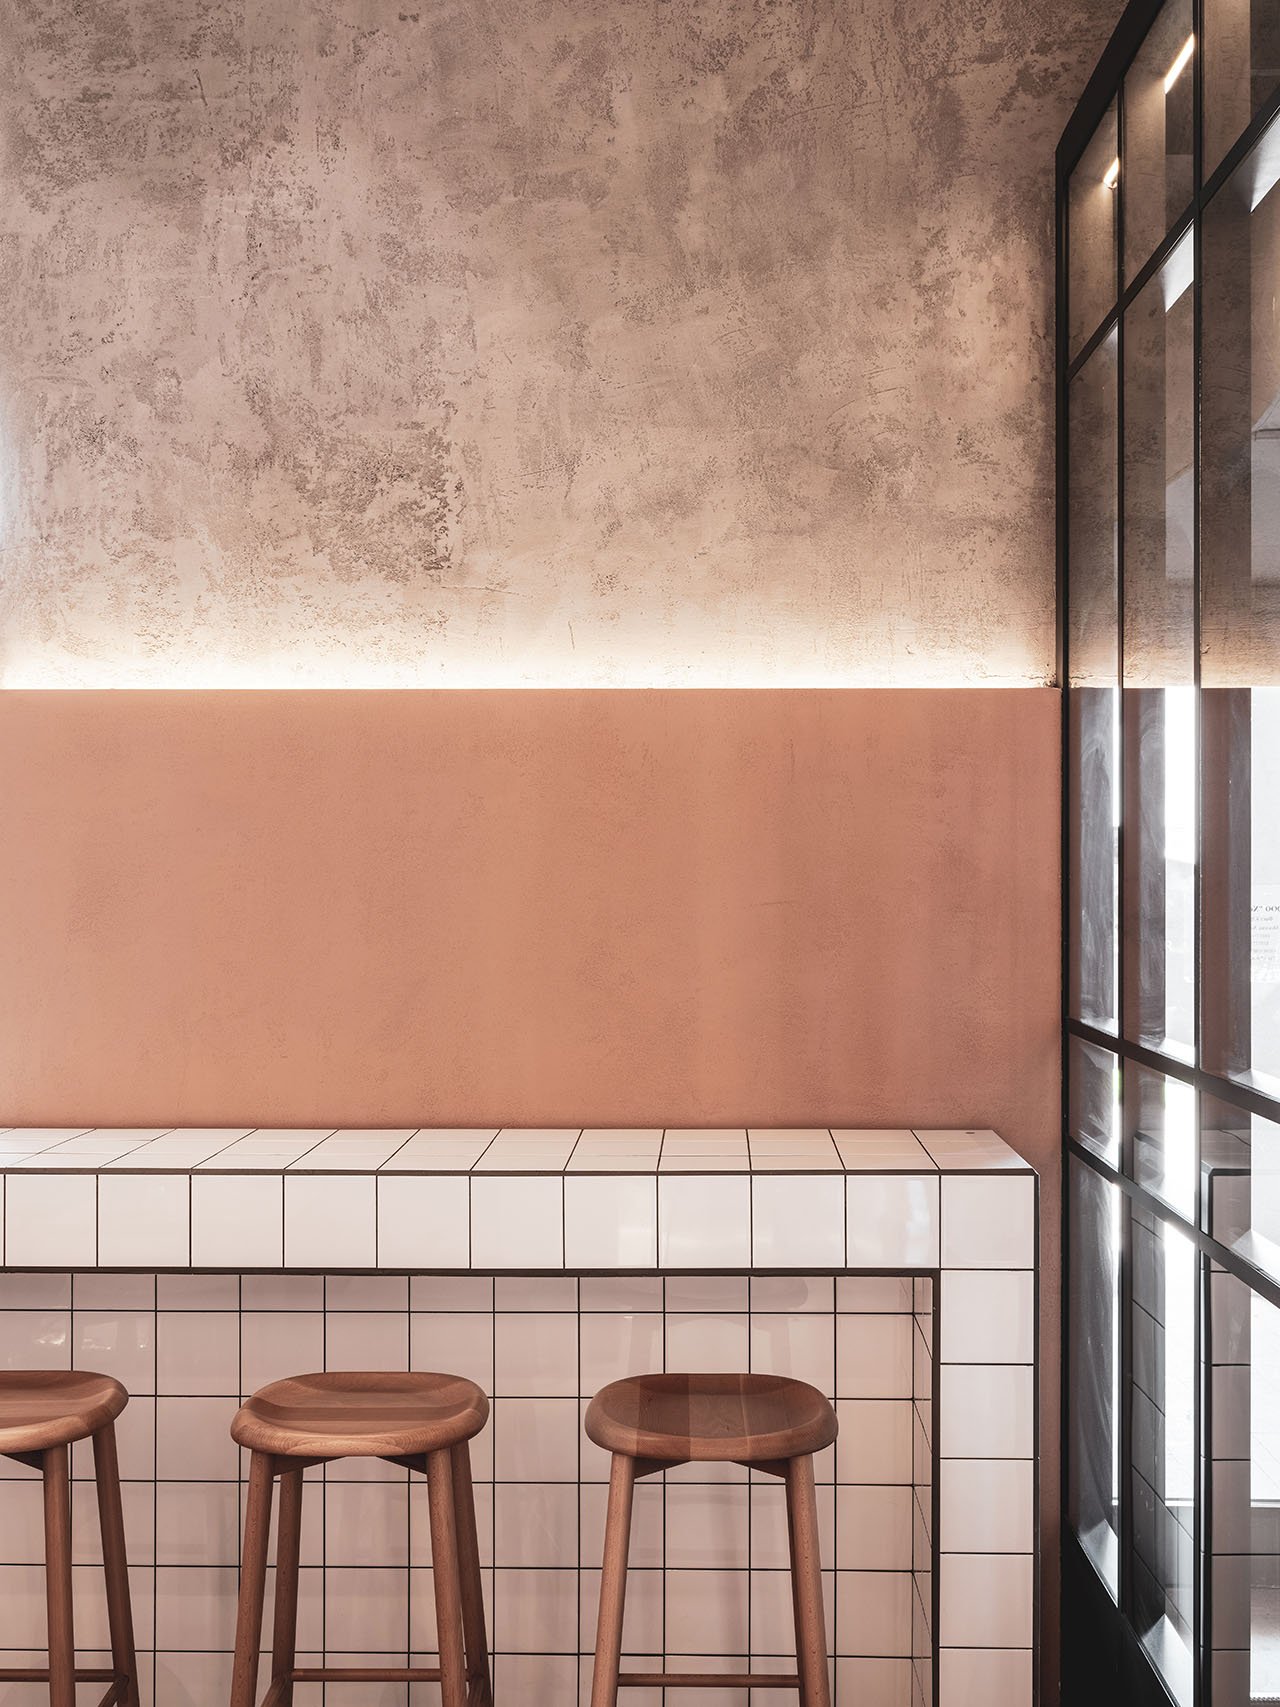 Polet Café by Asthetique in Moscow, Russia. Photography by Mikhail Loskutov.